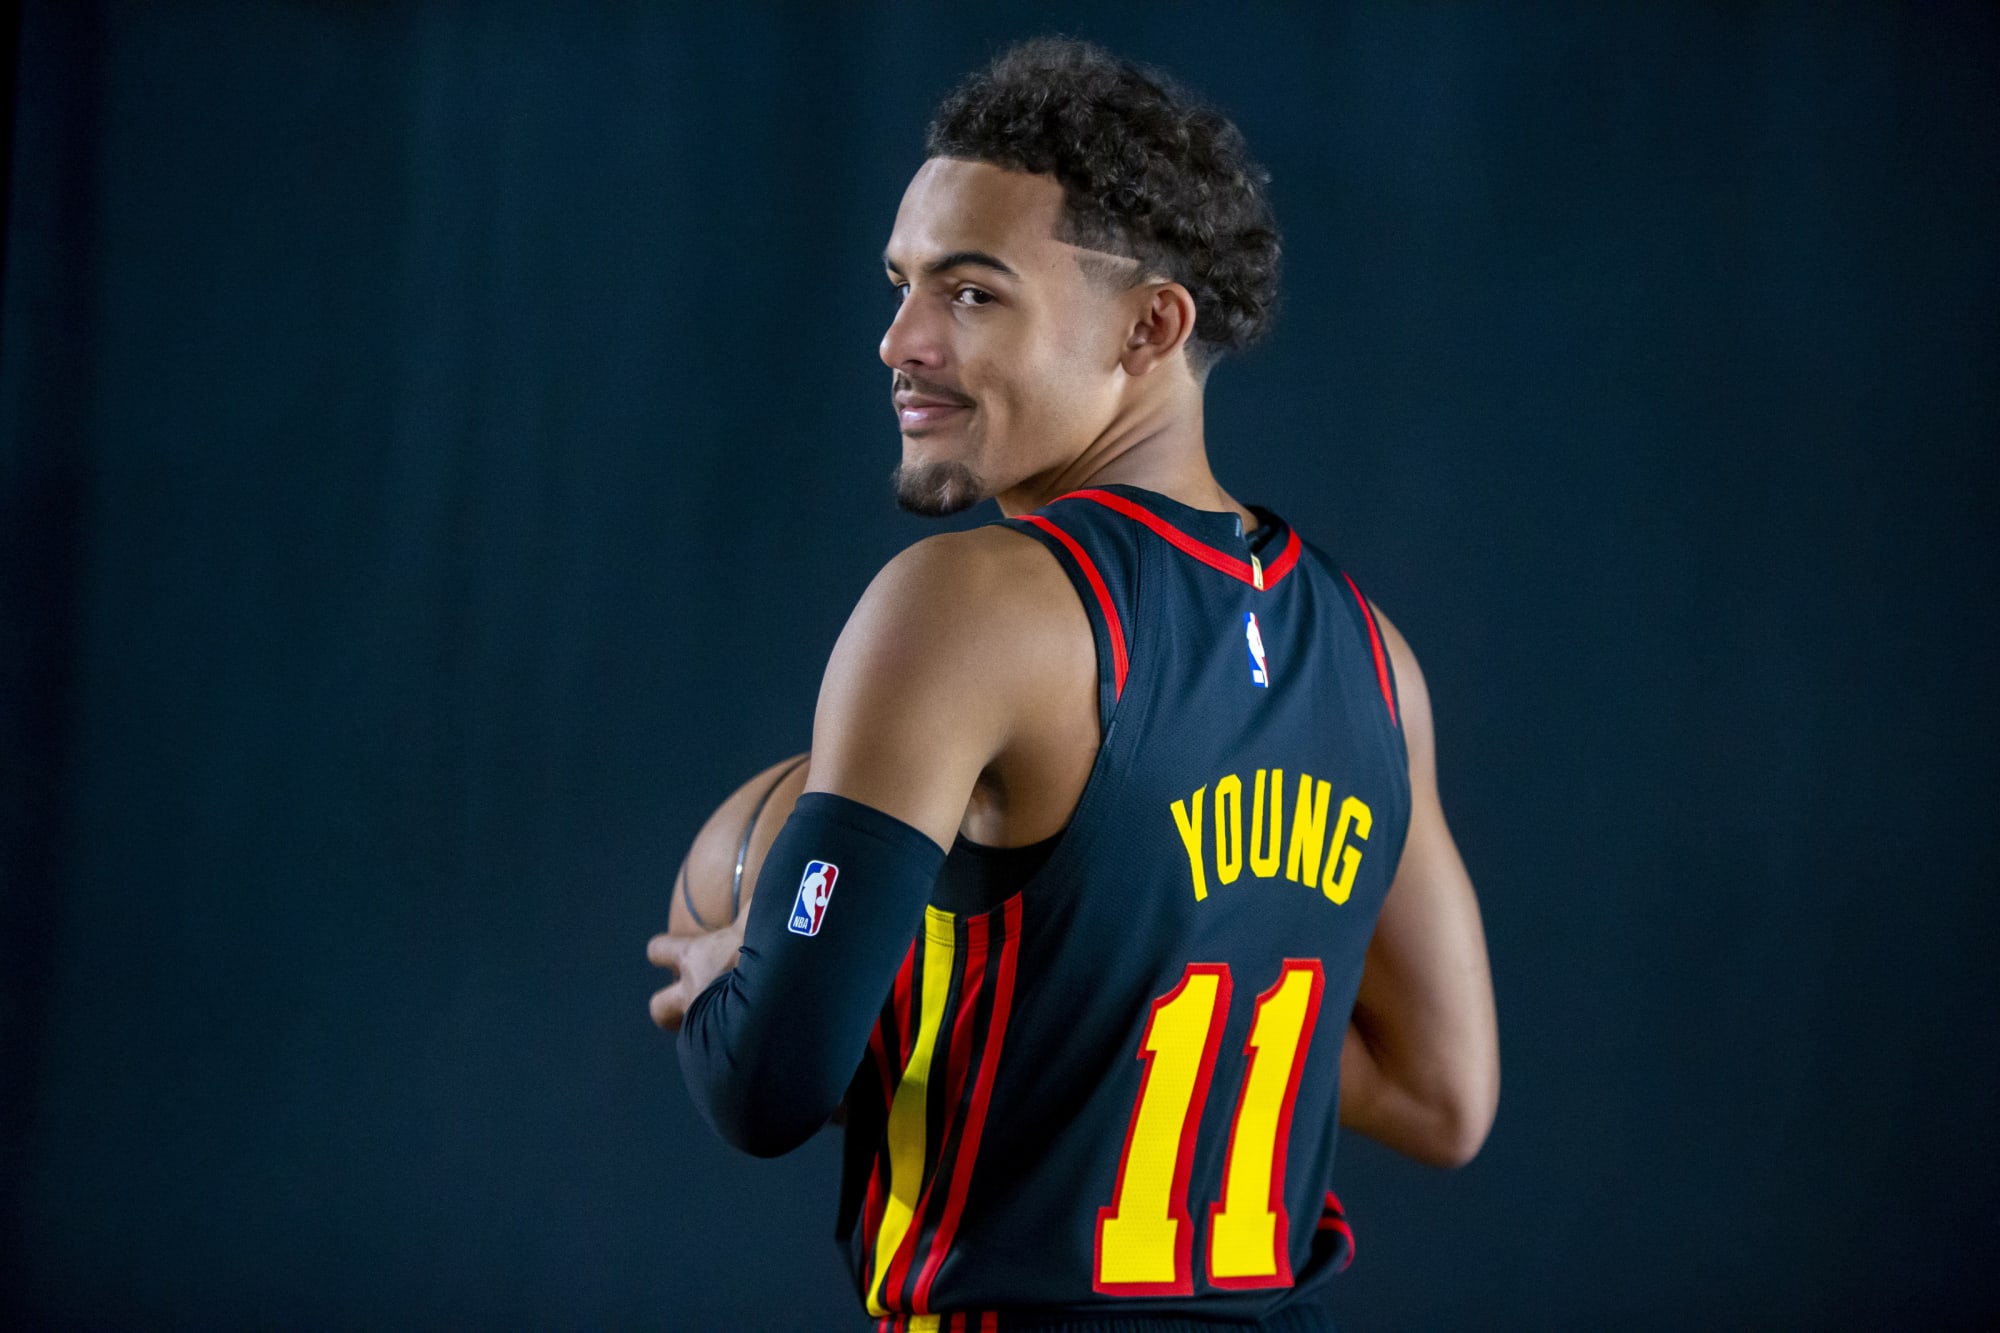 Photo of 25-under-25: Trae Young is putting in the work